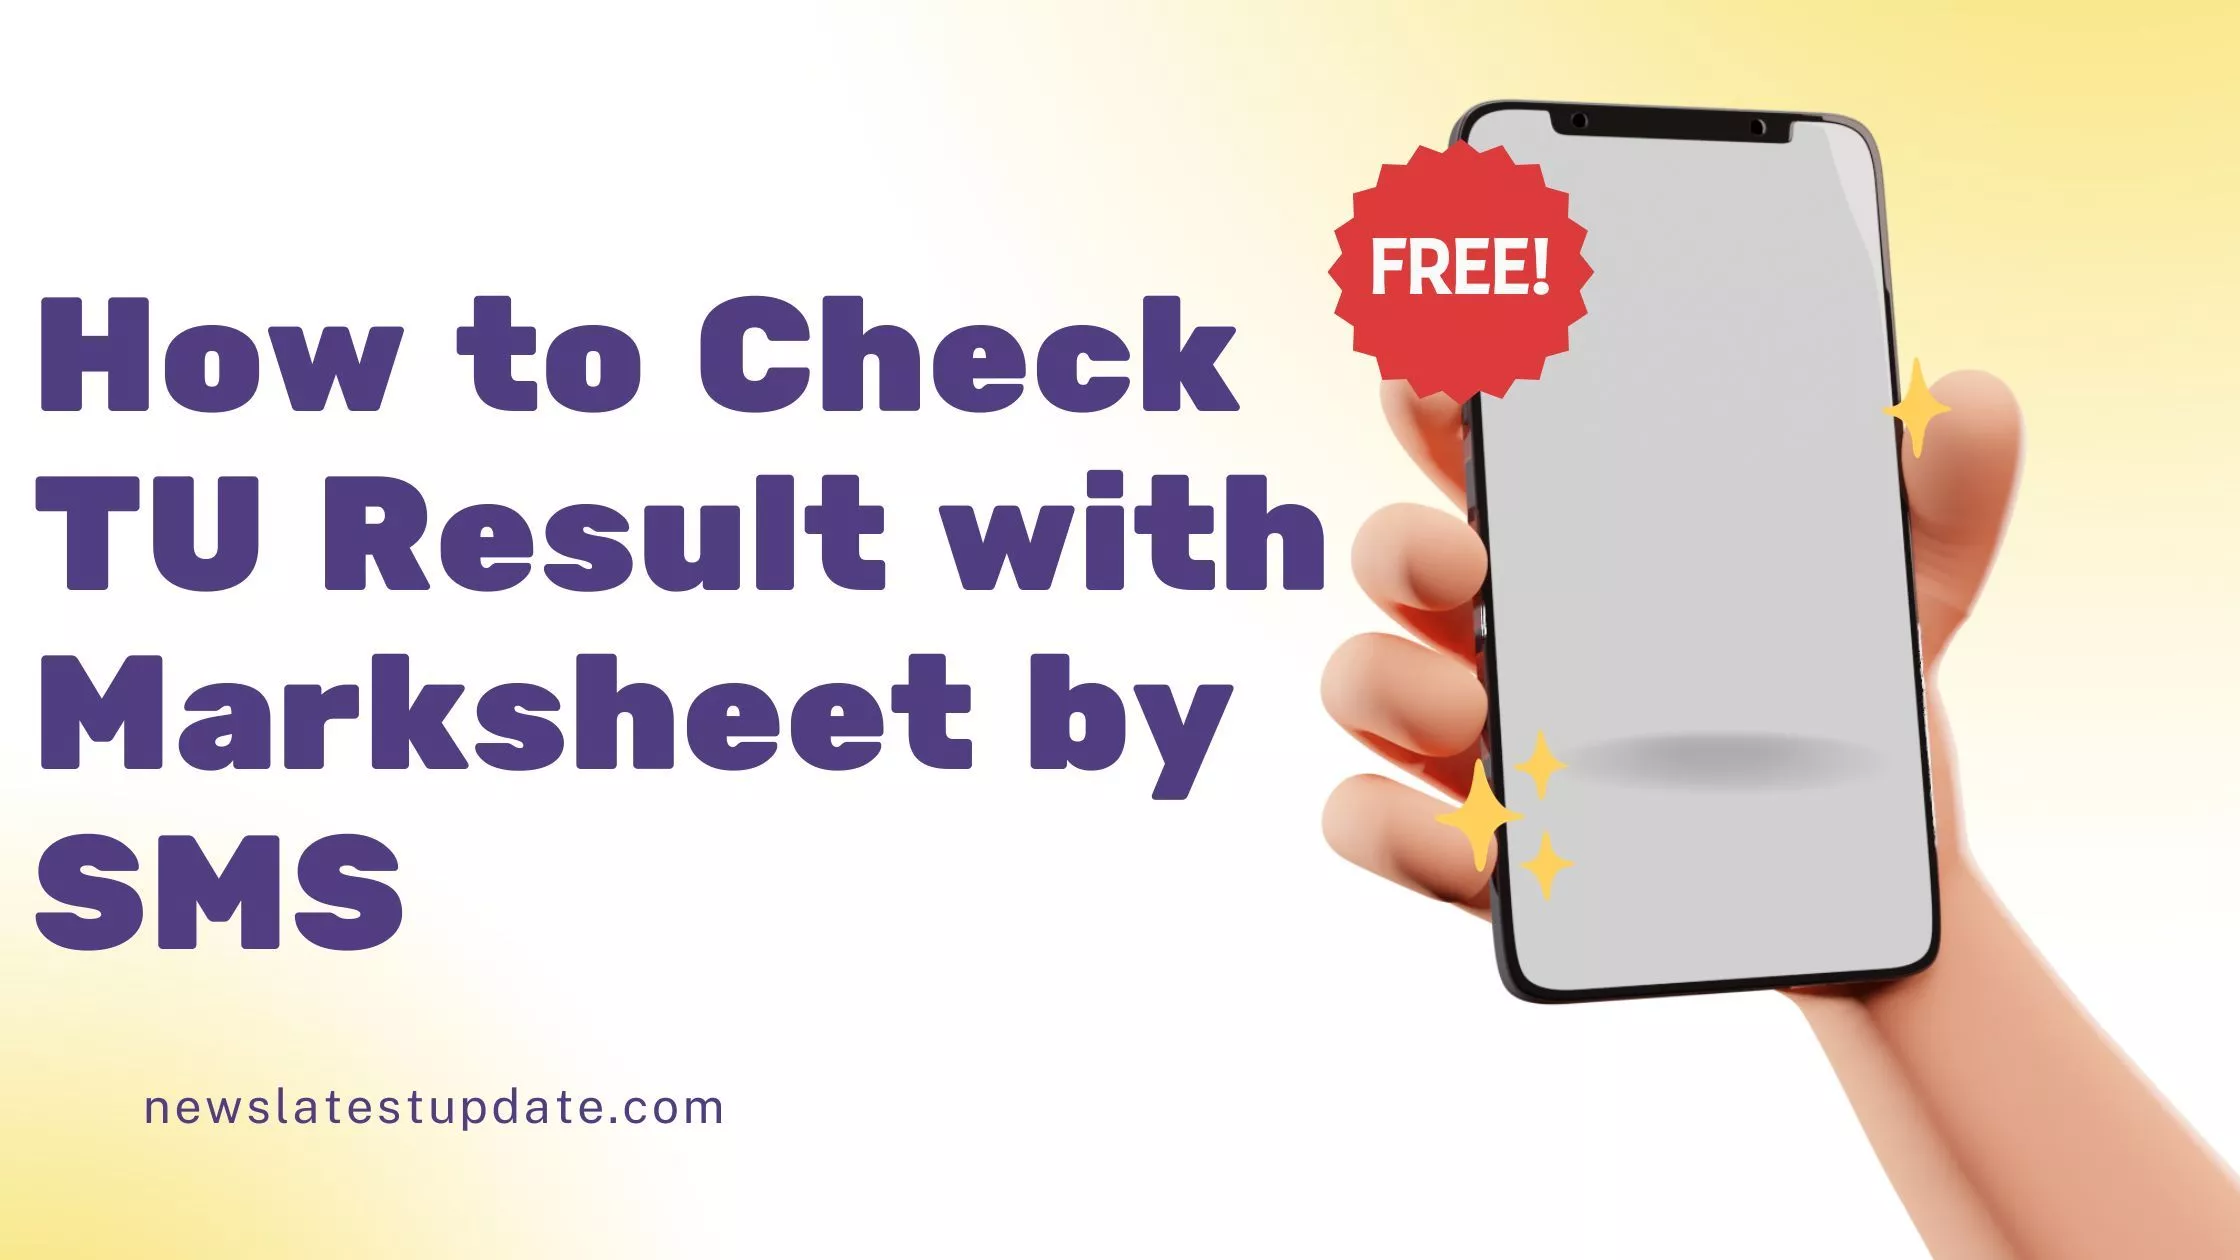 How to Check TU Result with Marksheet by SMS